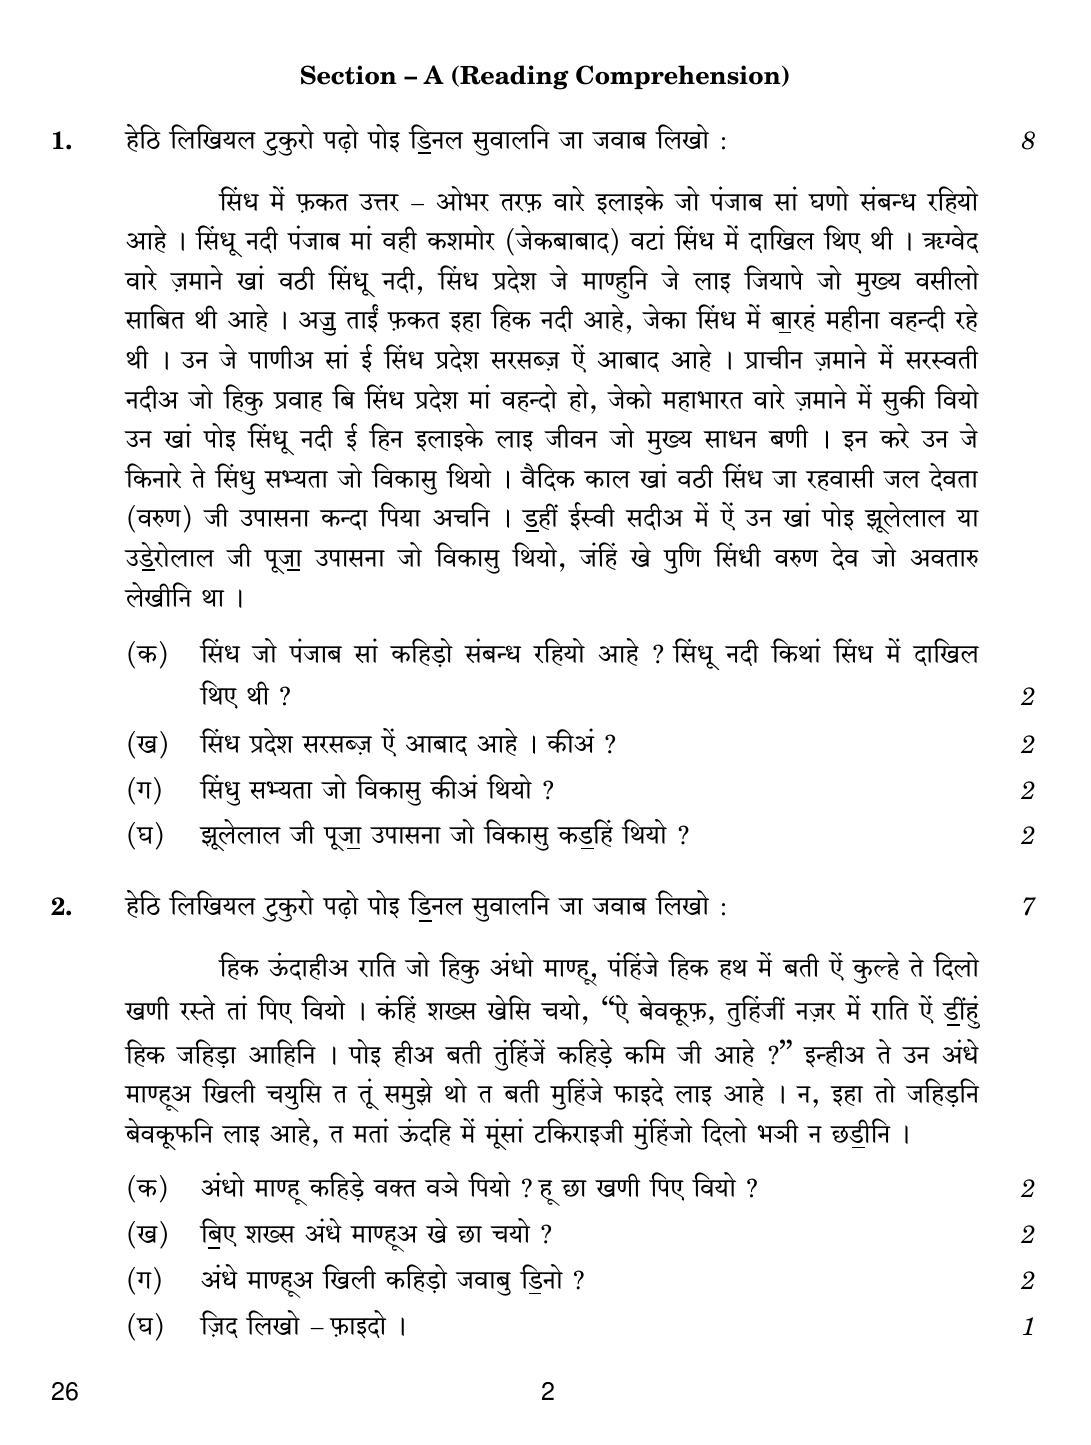 CBSE Class 10 26 SINDHI 2019 Question Paper - Page 2